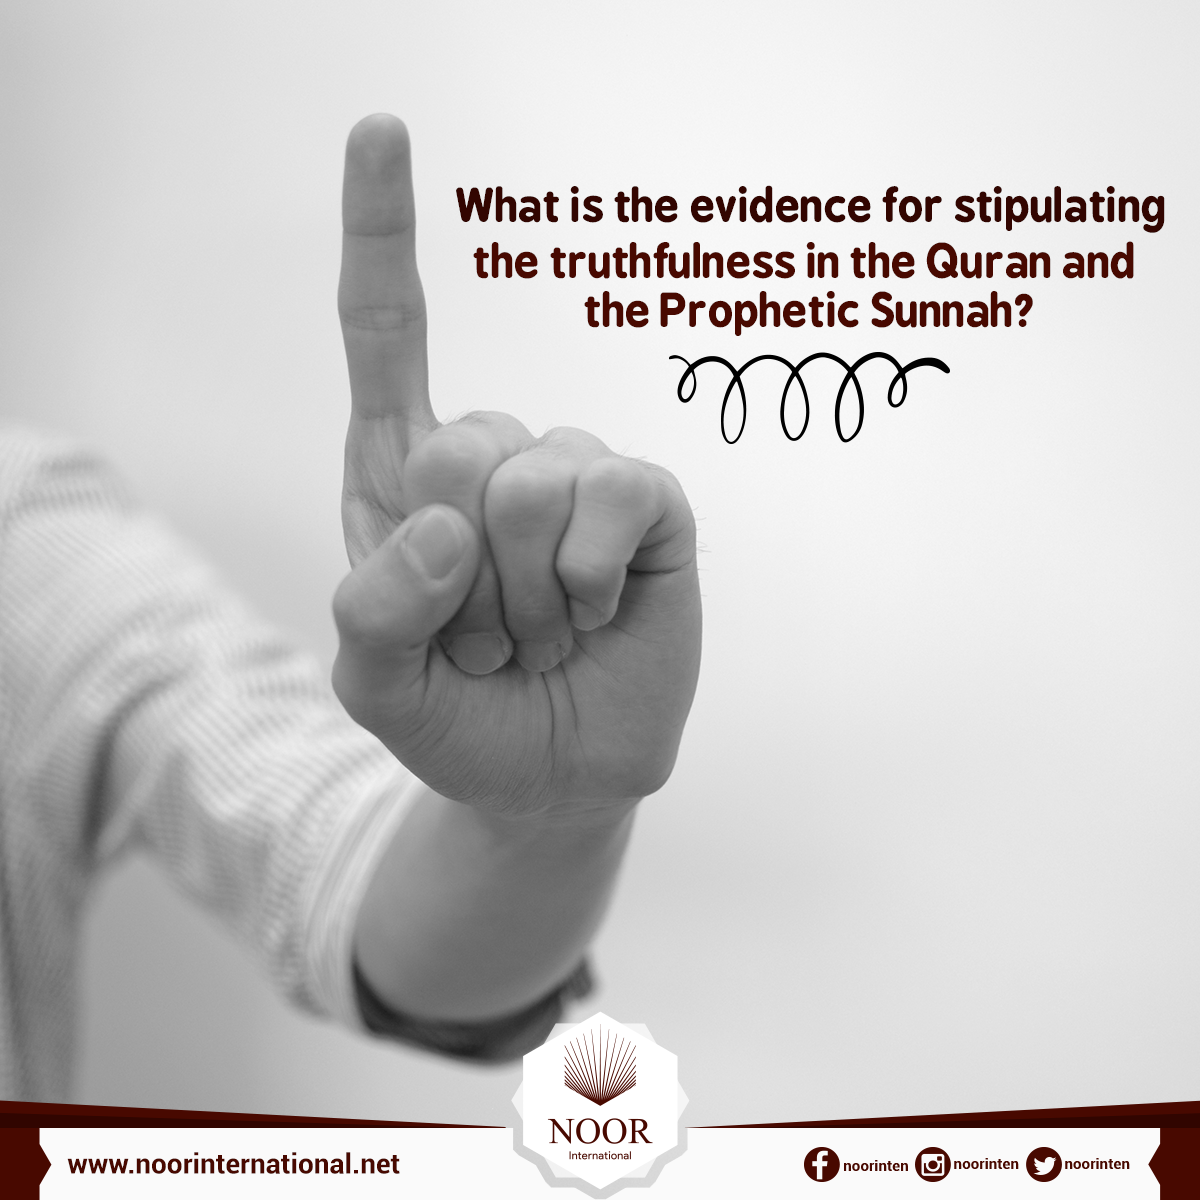 What is the evidence for stipulating the truthfulness in the Quran and the Prophetic Sunnah?